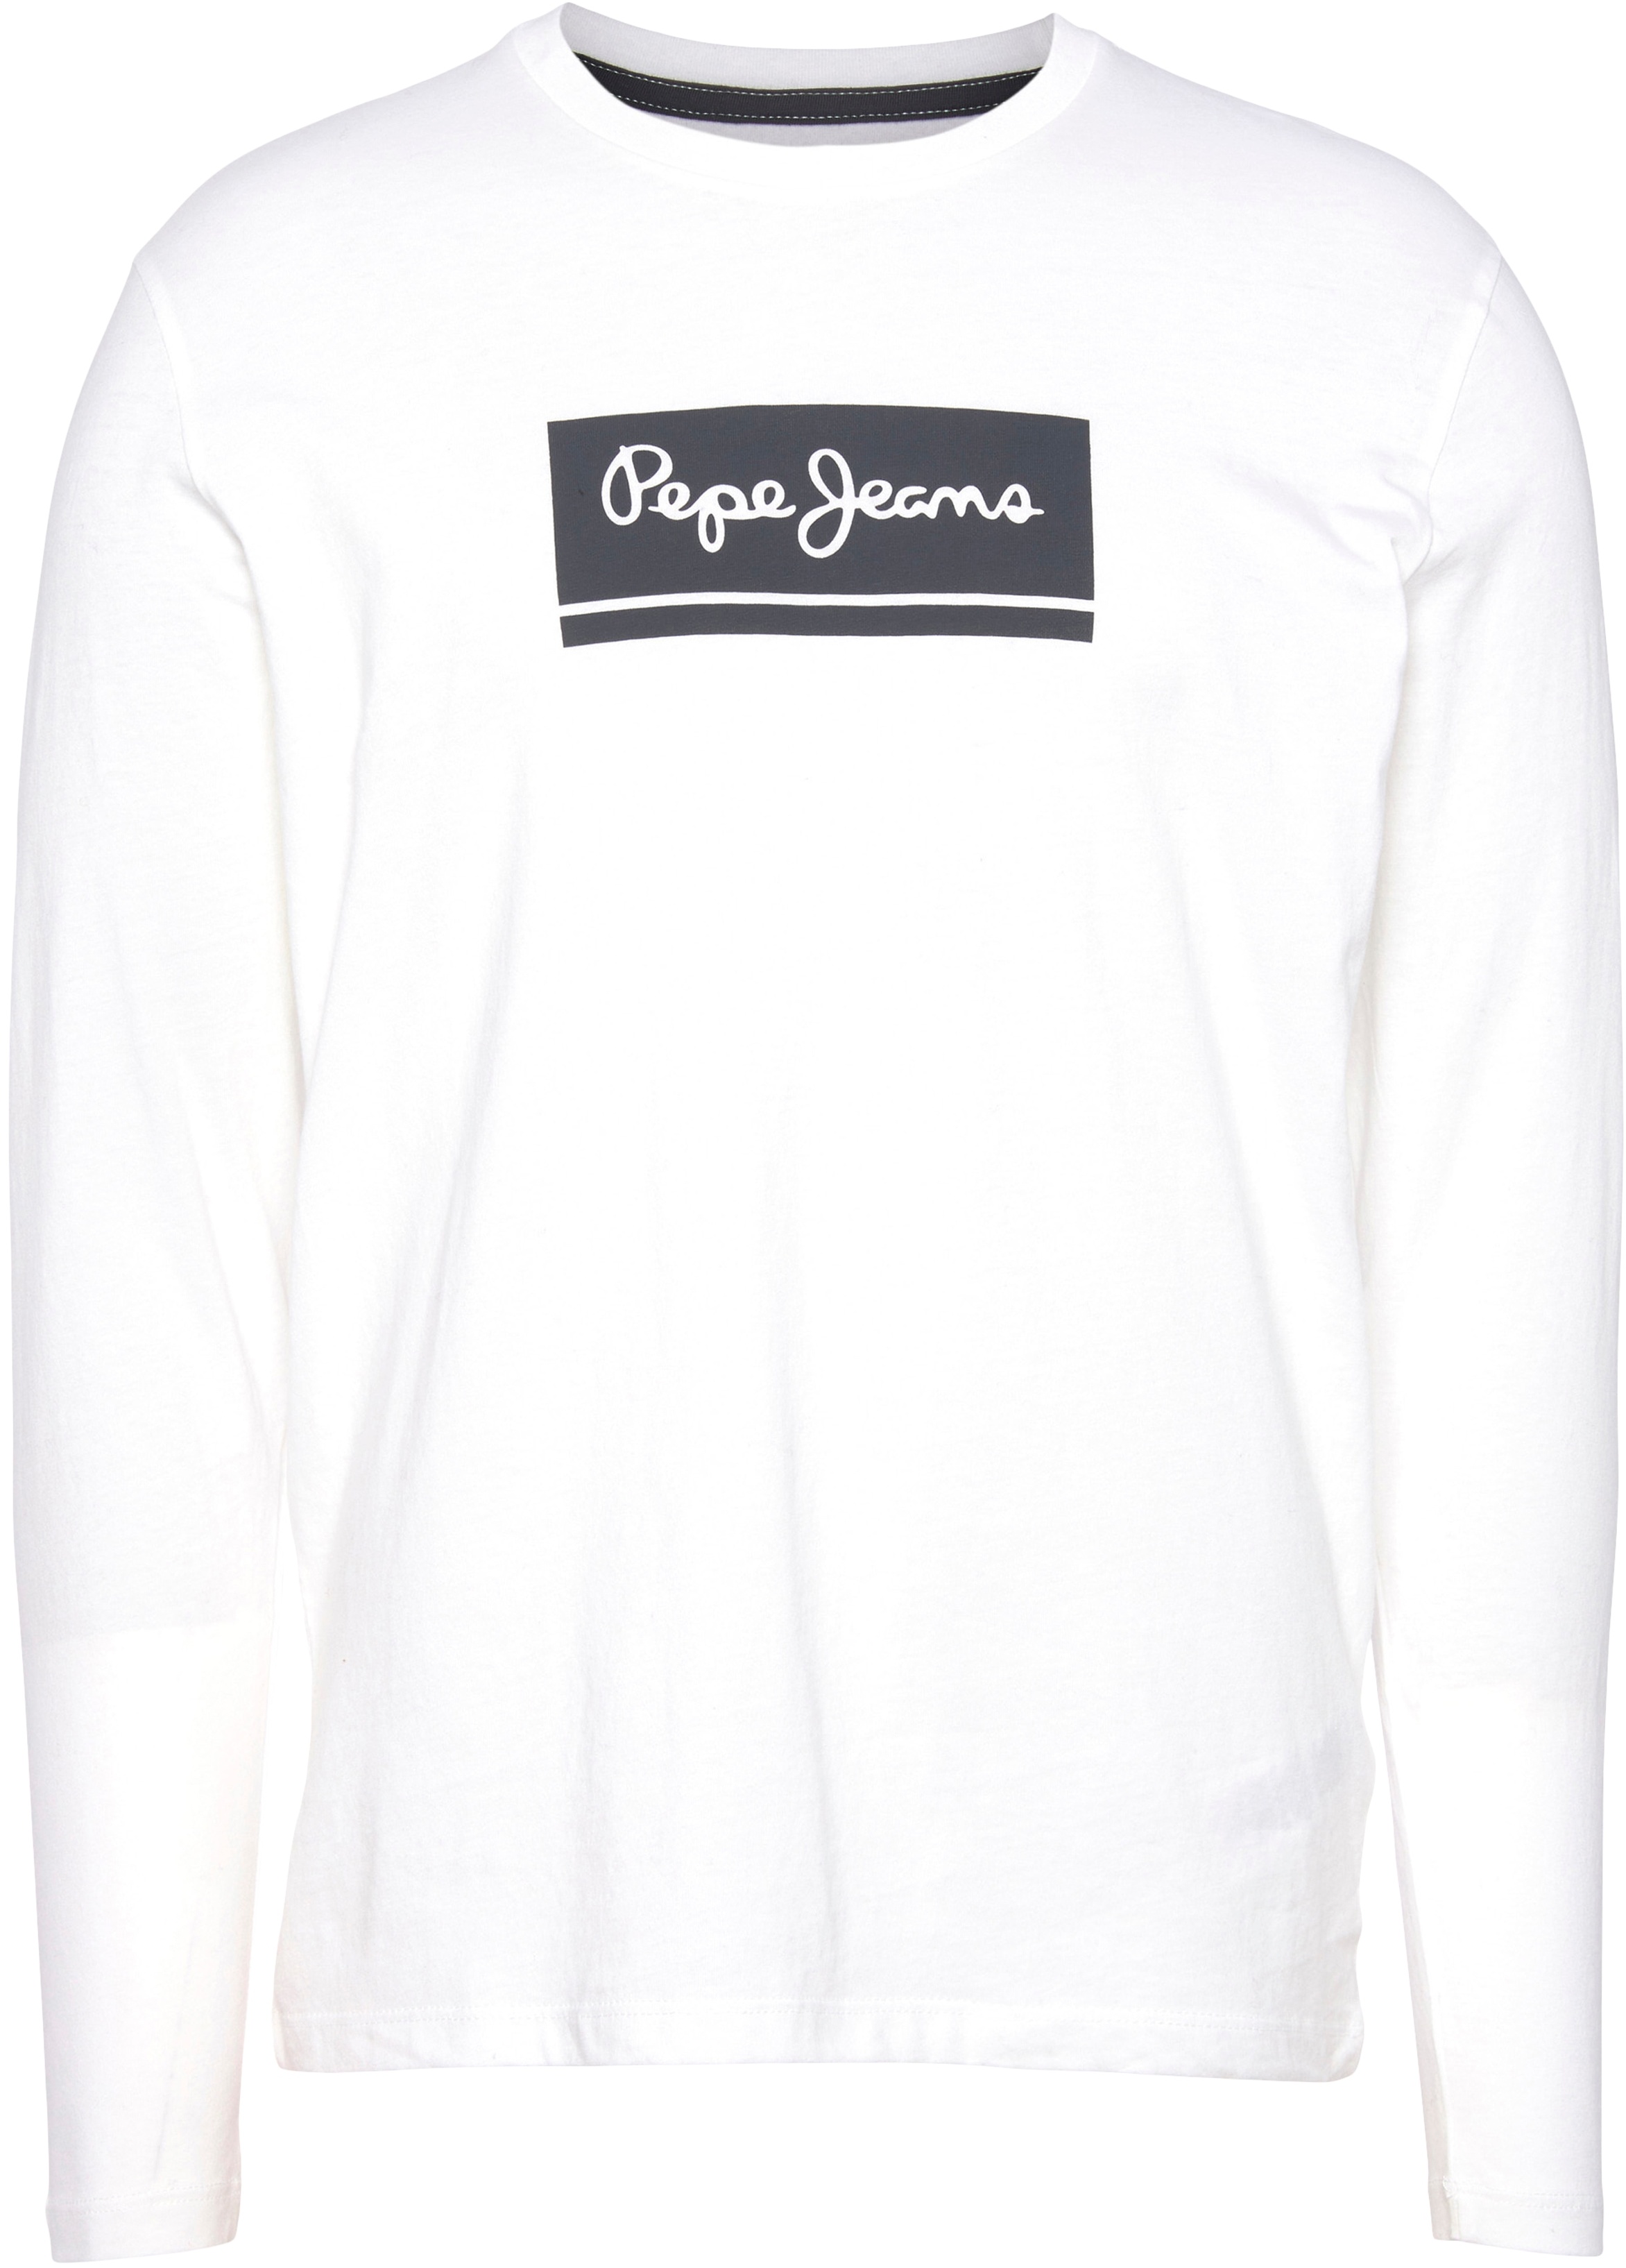 Pepe Jeans Longsleeve »Anthony« Pepe Jeans white XL